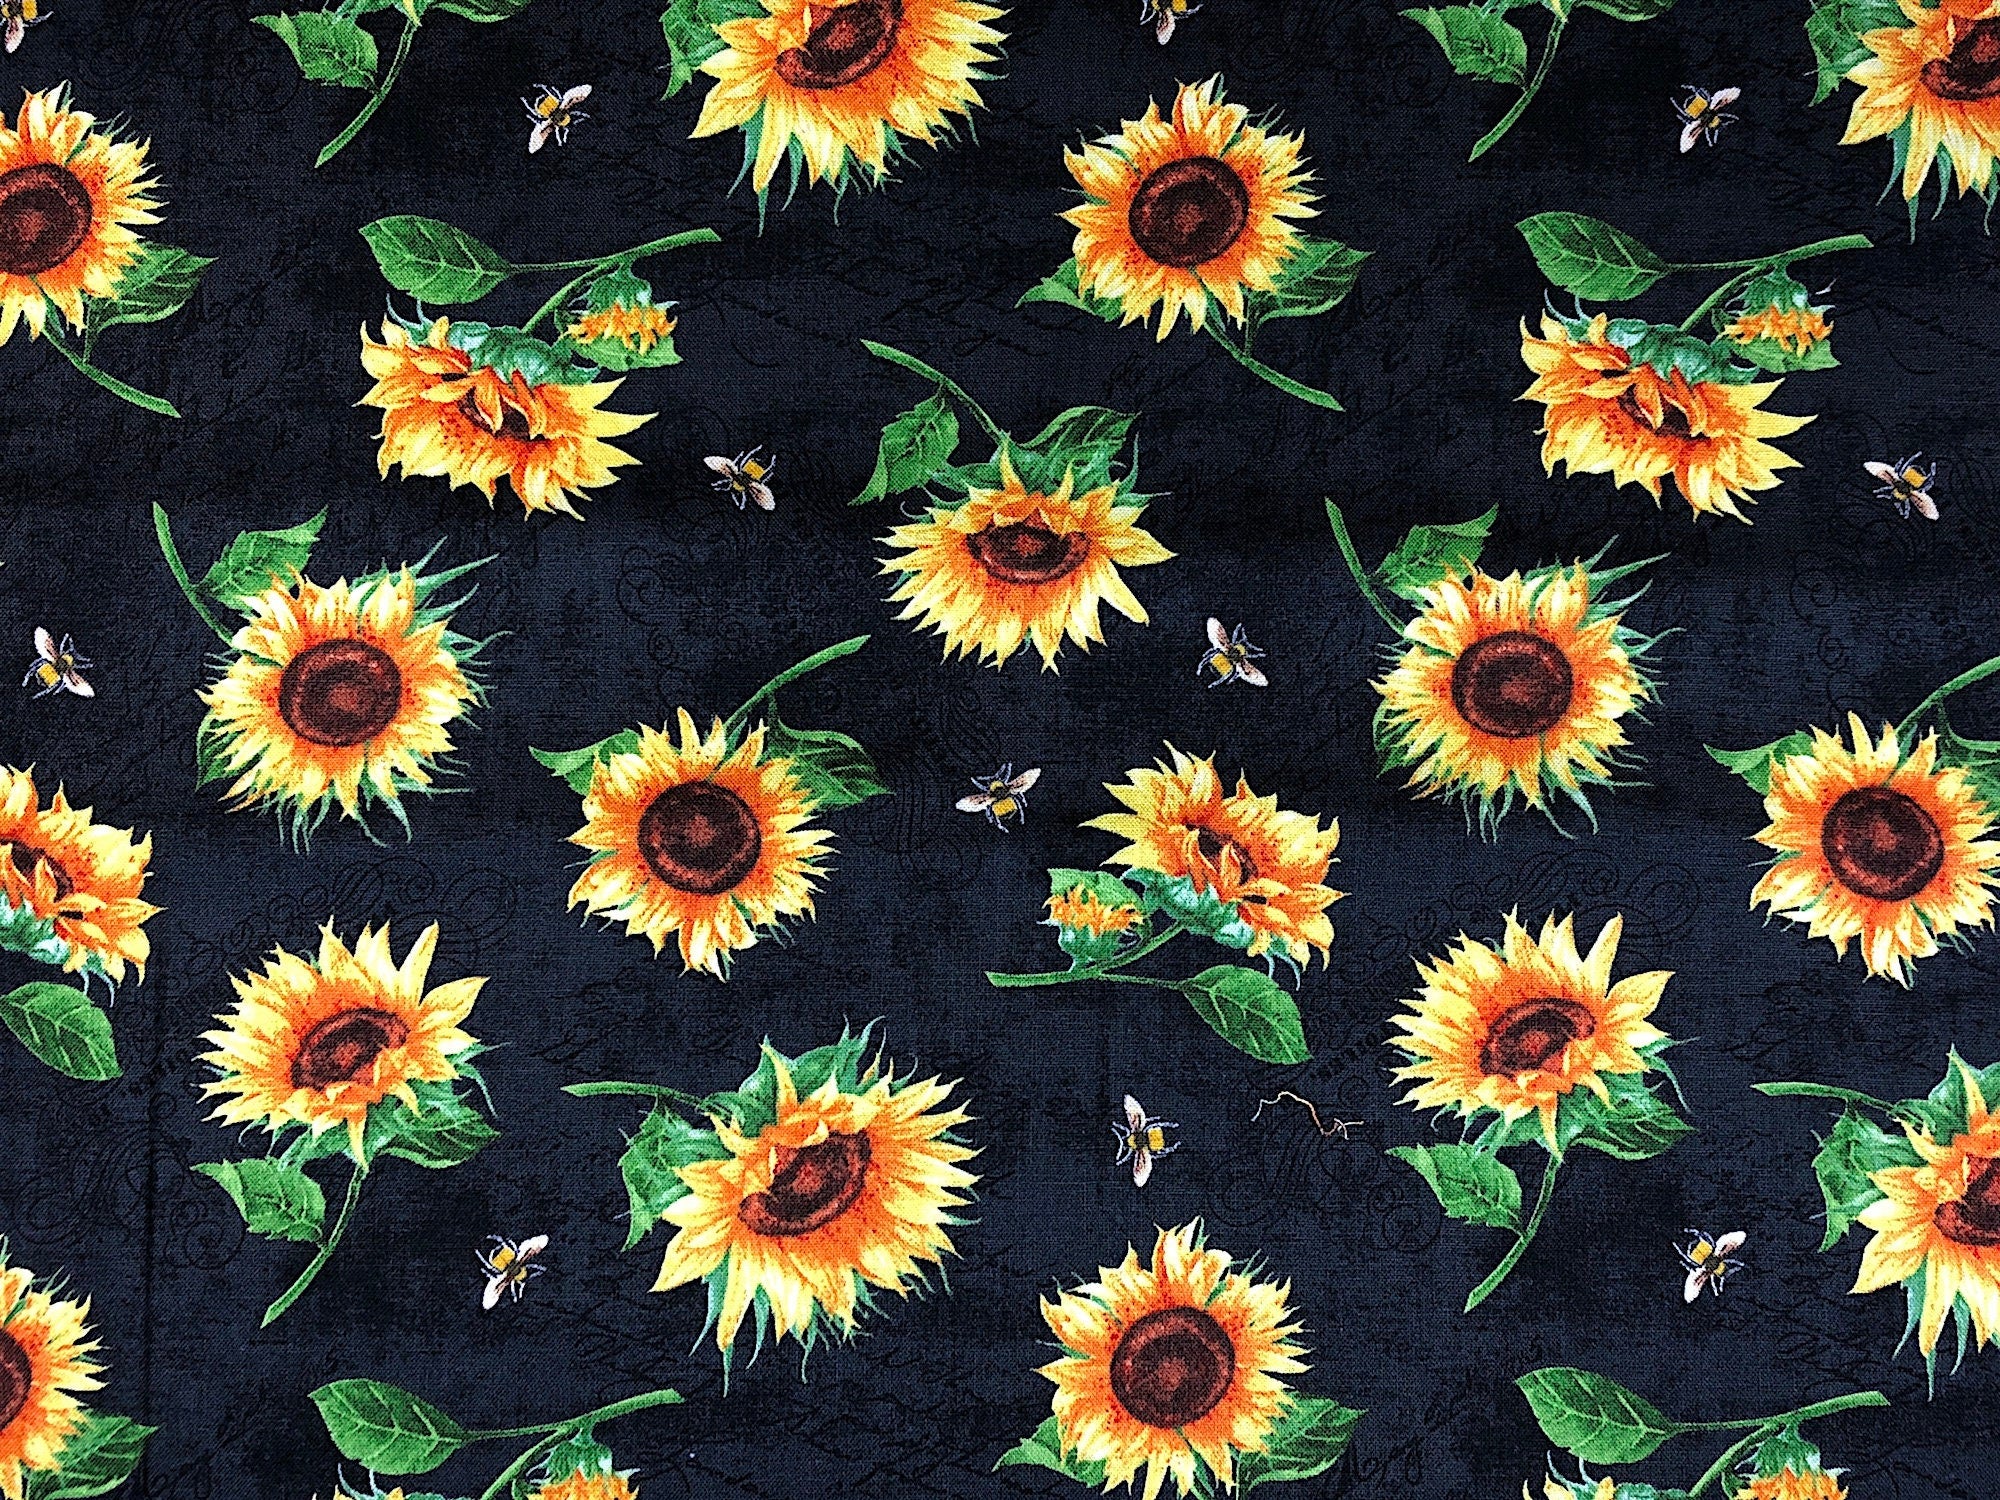 This fabric is called Sundance Meadow and is covered with sunflowers and bees. The background is black.